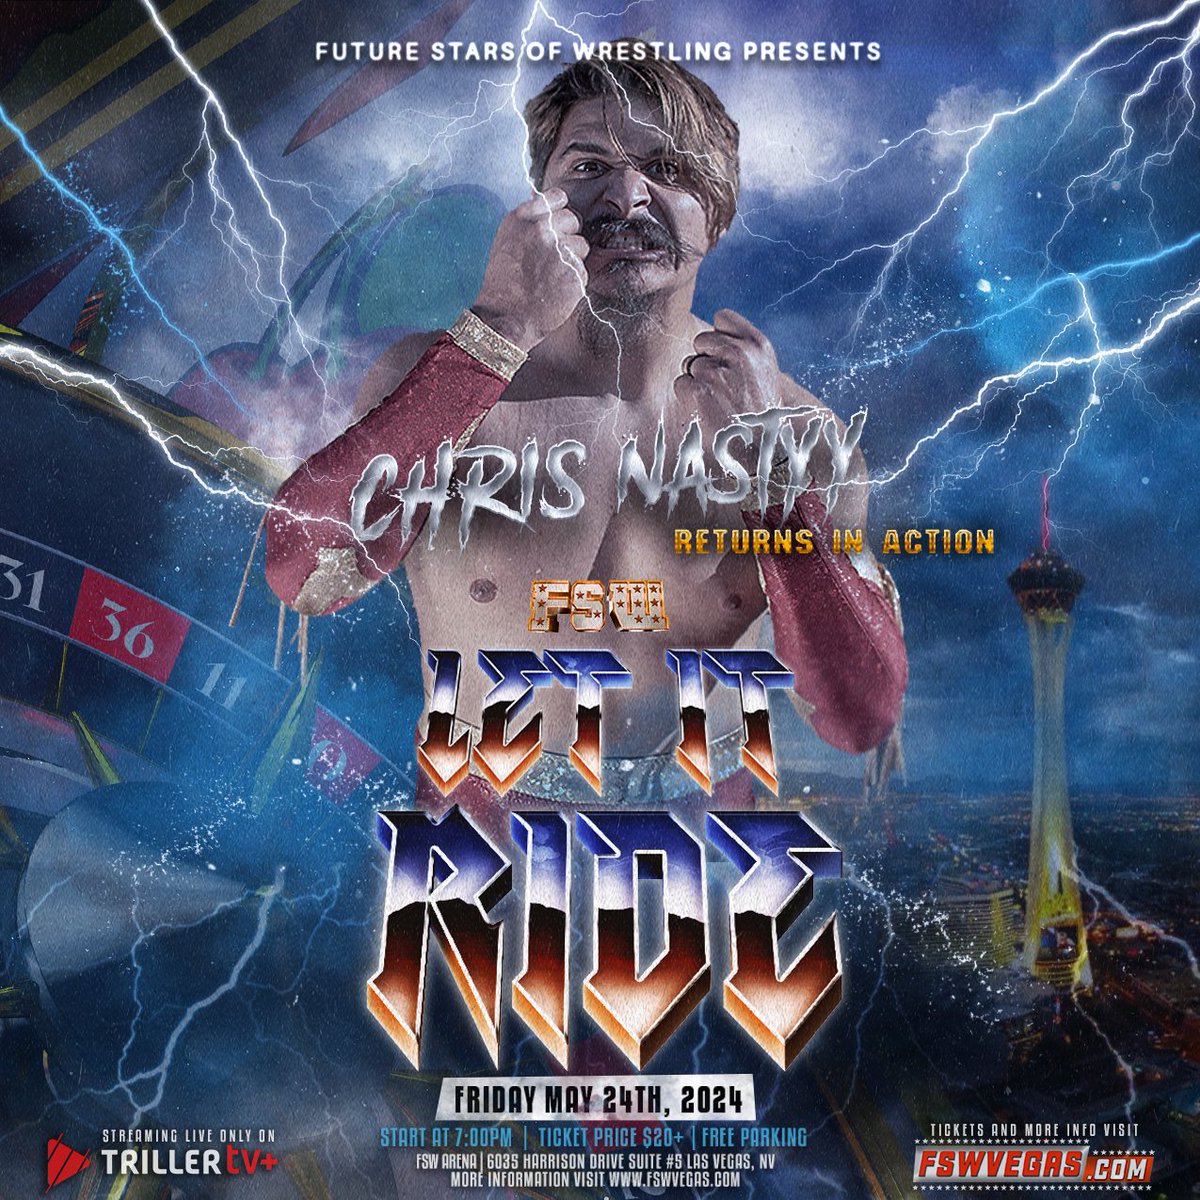 FSW Let It Ride Friday May 24, 7PM PST LIVE on @FiteTV+ FSW Arena | #LasVegas 𝙁𝙚𝙖𝙩𝙪𝙧𝙞𝙣𝙜 The return of @chrisnastyy_! Ticket + Streaming links in the bio!